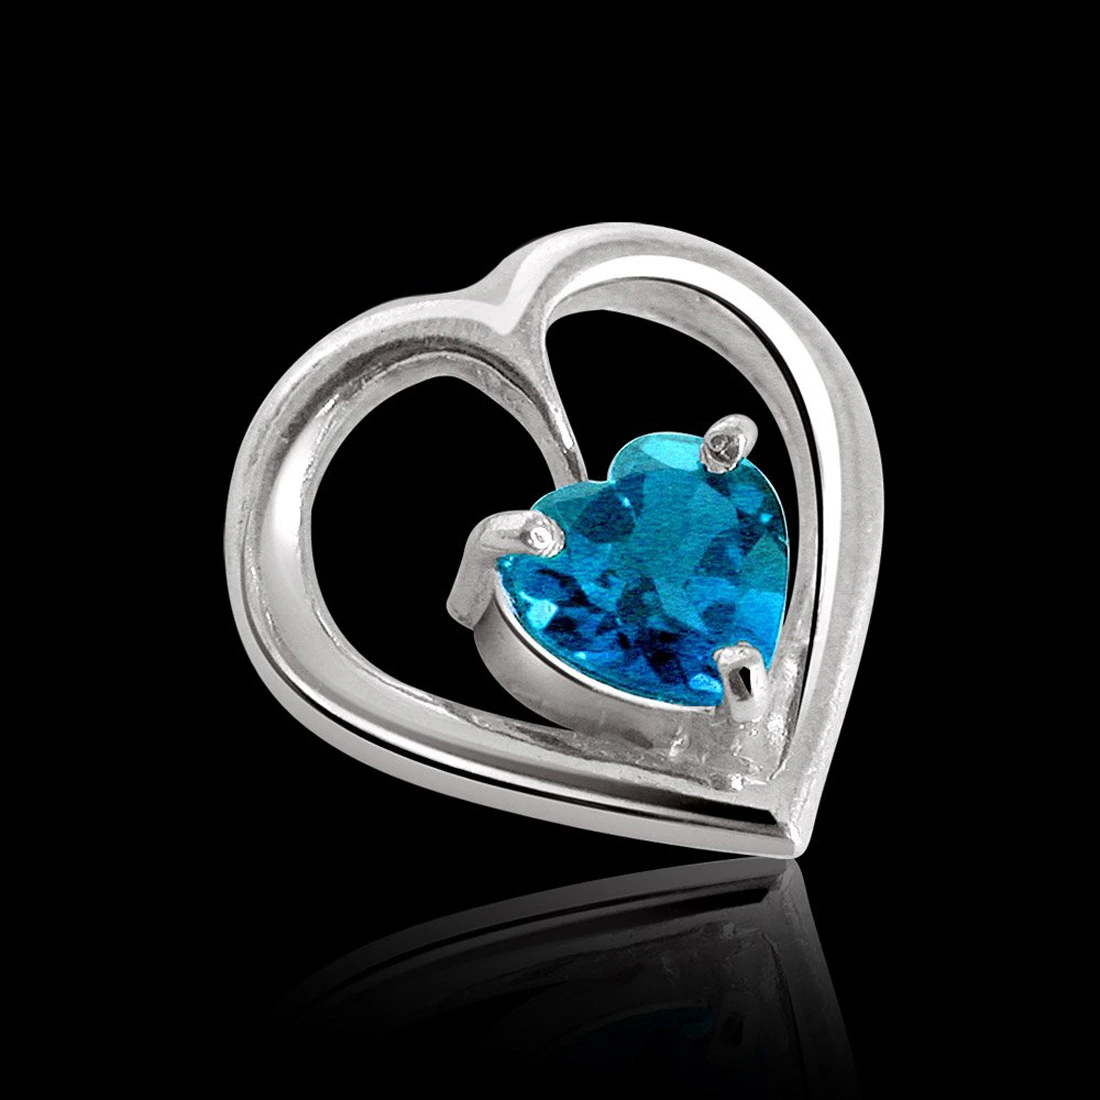 Heart Shape Blue Topaz Pendant & Earring Set with Silver finished Chain for Girls (SDS116)